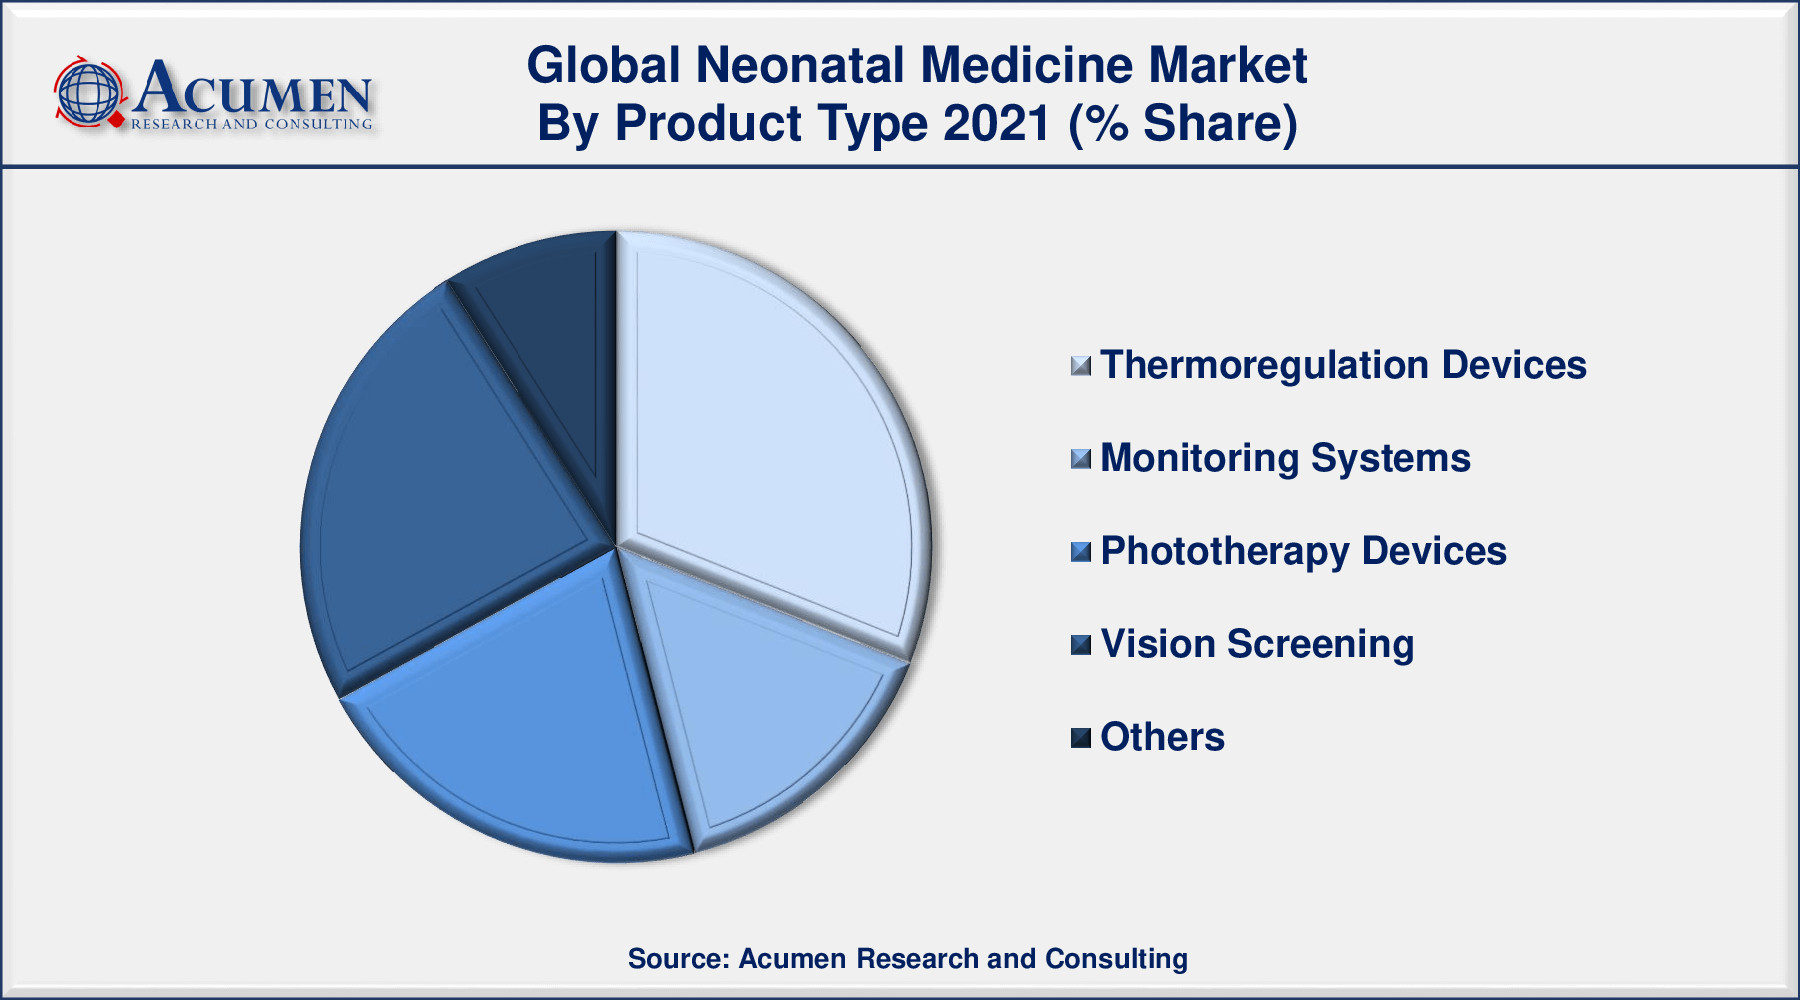 Global neonatal medicine market revenue is projected to expand by USD 7,171 million by 2030, with a 7.2% CAGR from 2022 to 2030.